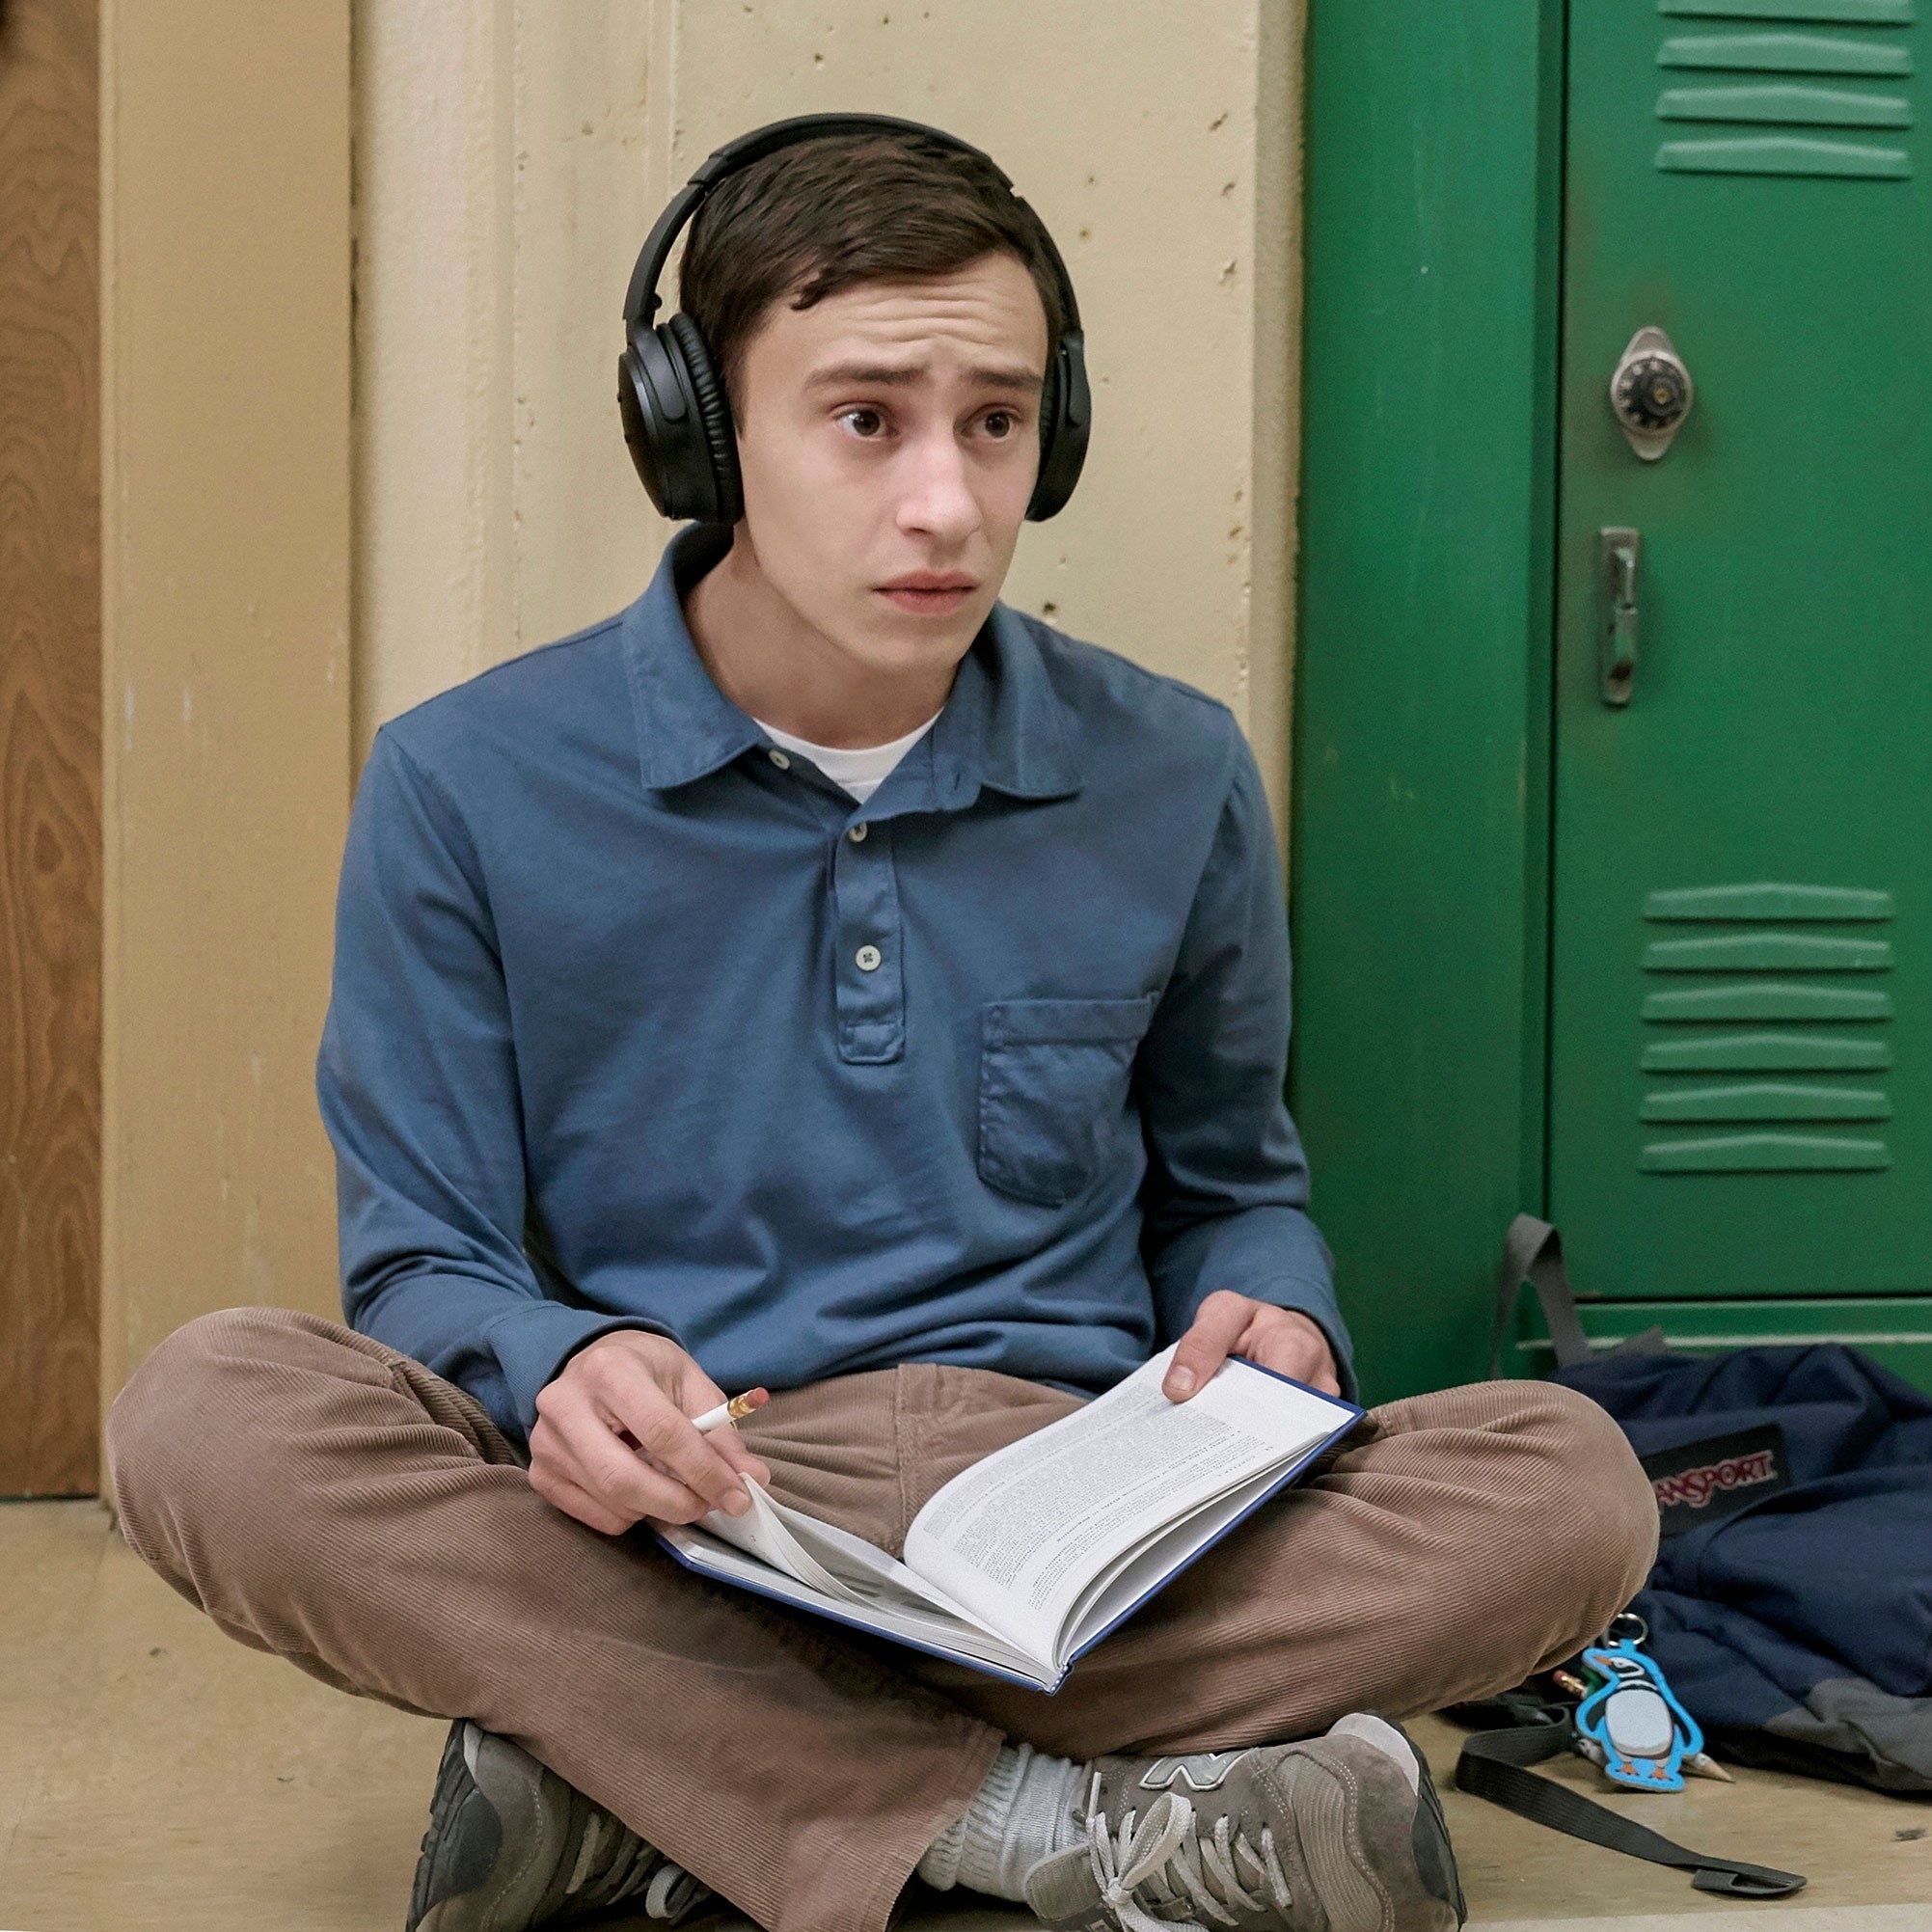 Keir as Sam sitting on the floor with folded legs, holding a book in his lap and a pencil in his hand. He is also wearing headphones